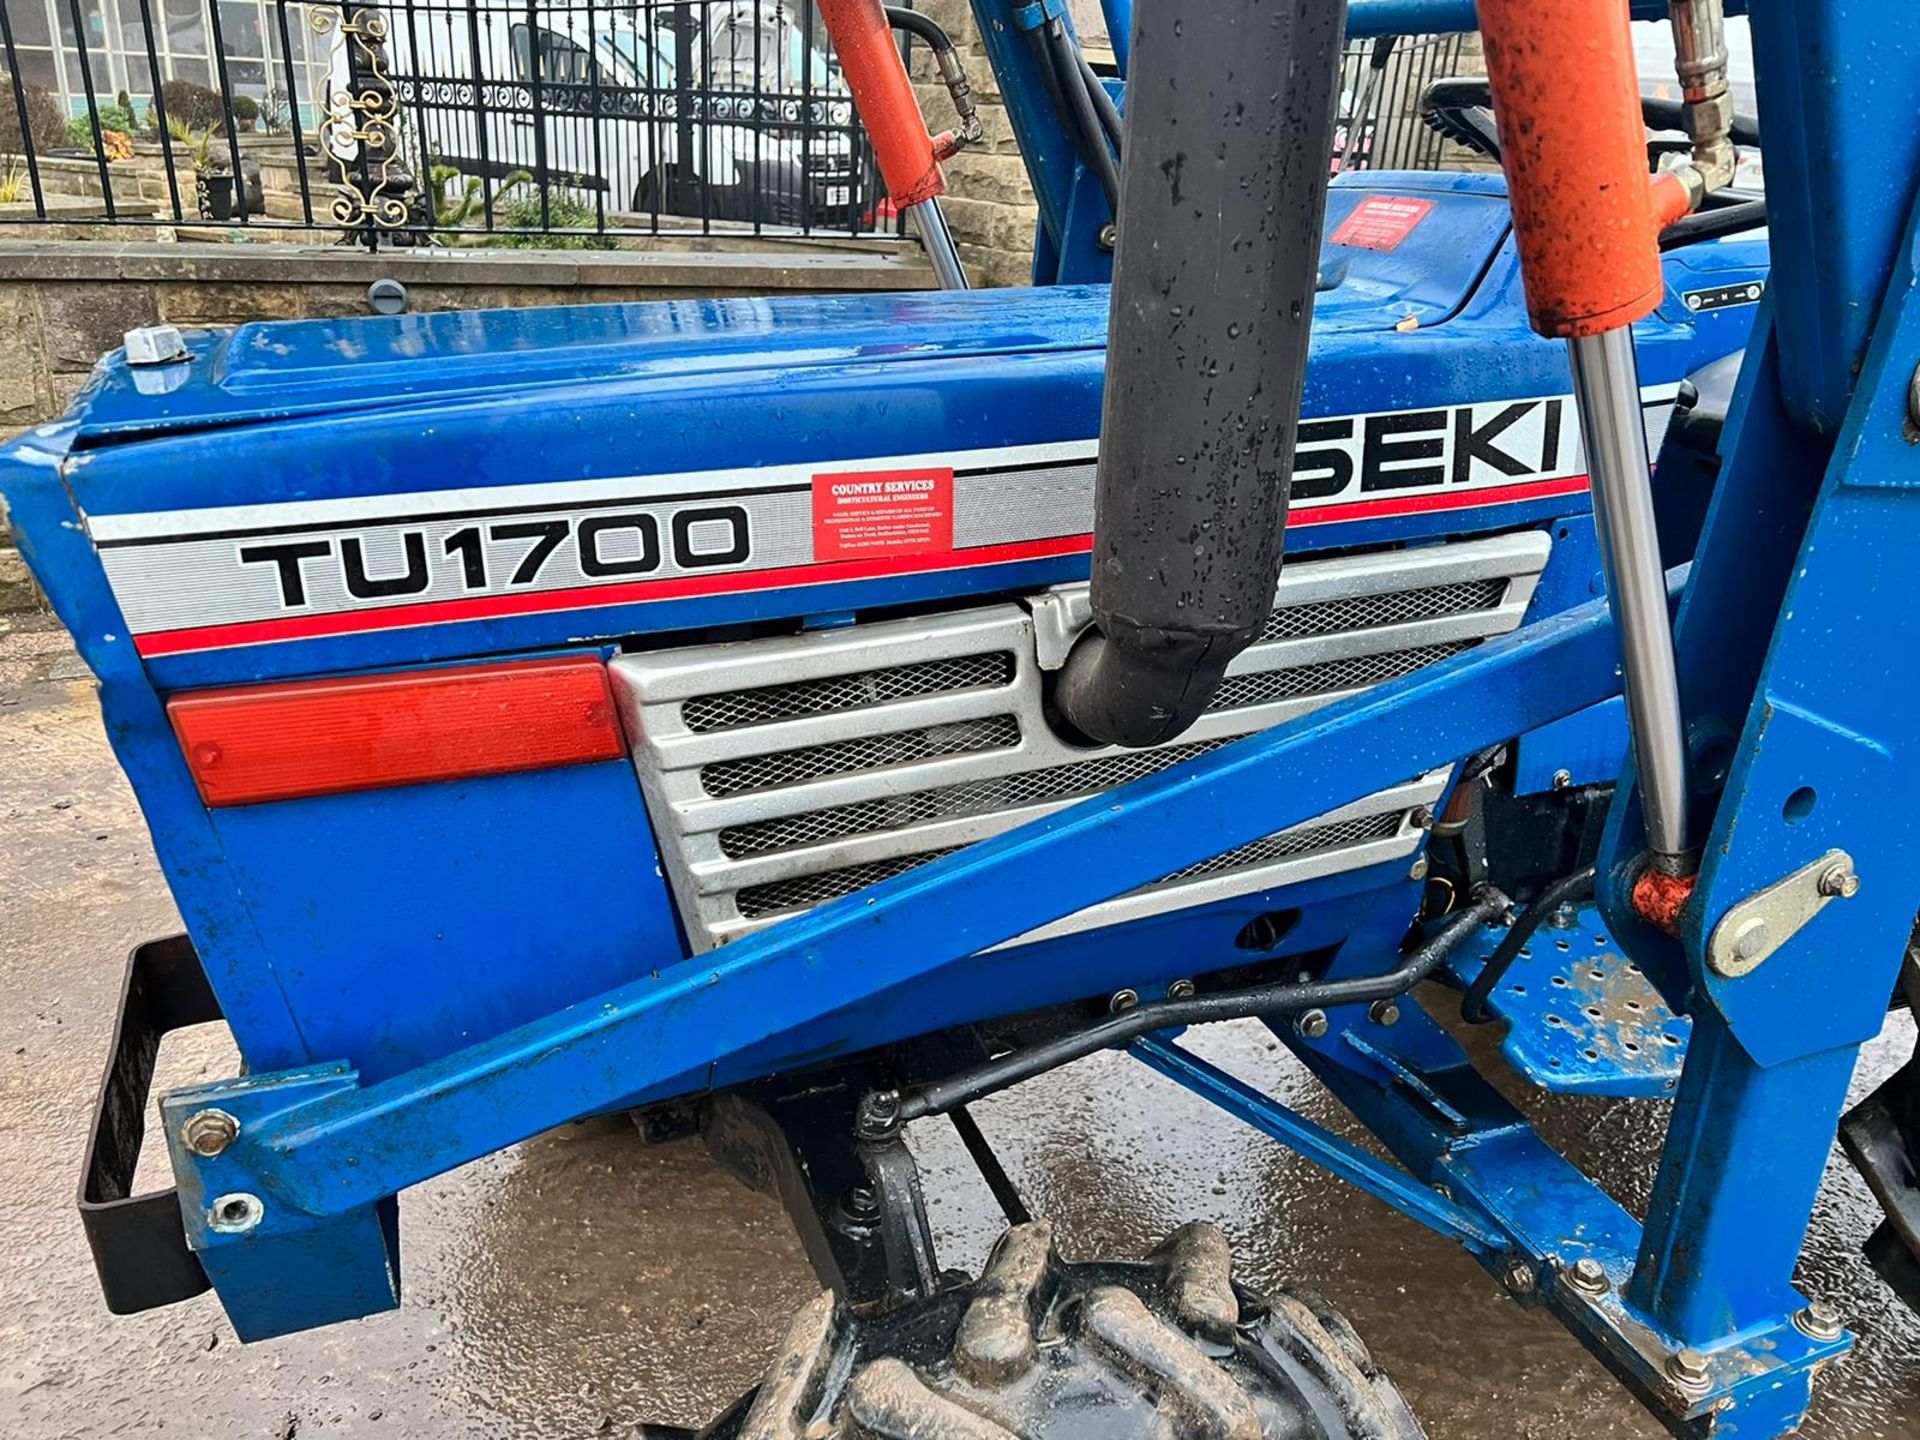 ISEKI TU1700 4WD COMPACT TRACTOR WITH FRONT LOADER AND BUCKET, RUNS DRIVES AND LIFTS PLUS VAT* - Image 18 of 18